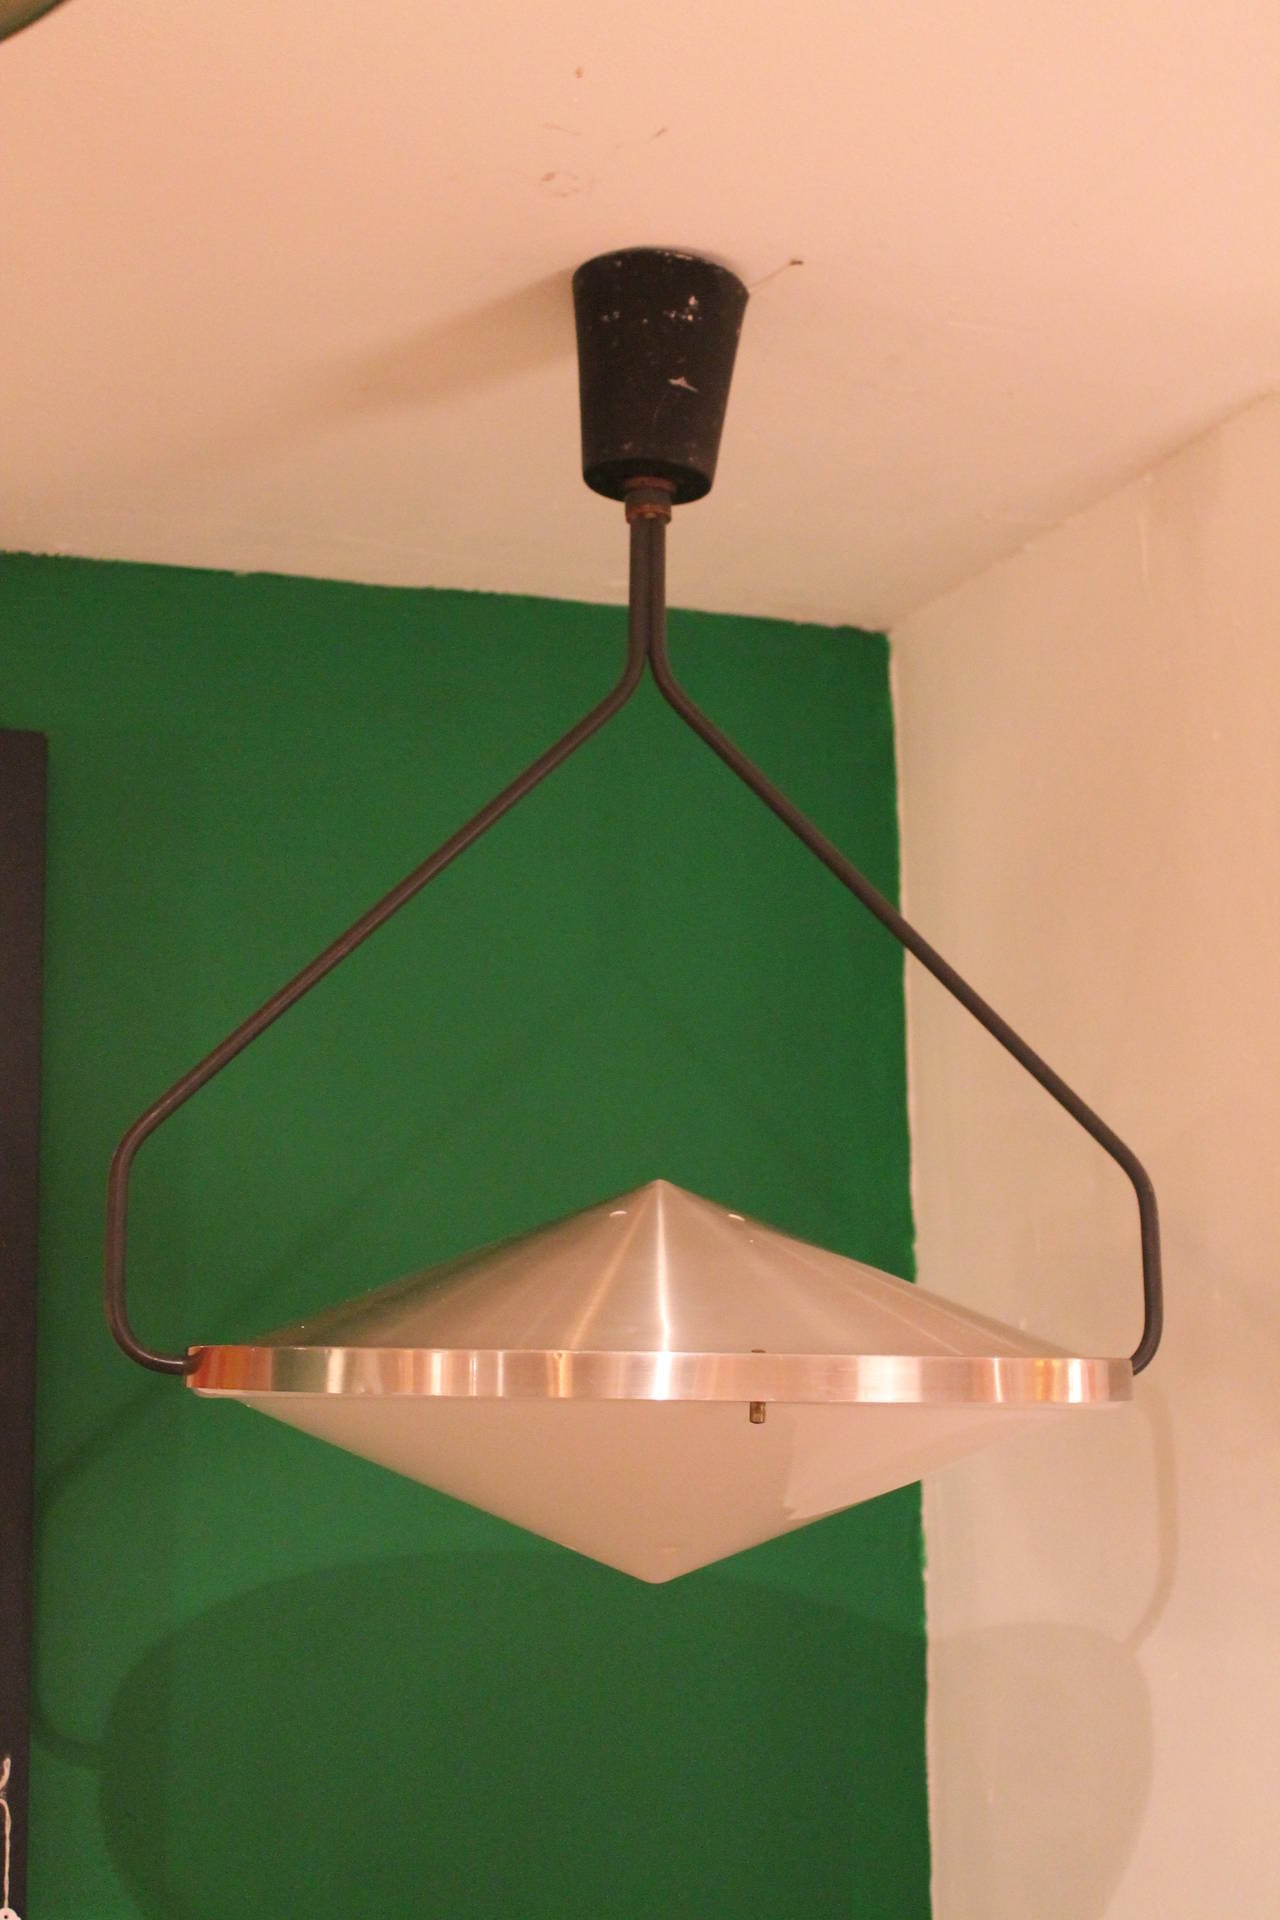 RAAK pendant by B. Lodder for RAAK in 1972.

This lamp is gimbaled to hung like a compass on a ship and can be rotated 180 degrees, metal and plexiglass with pull-pendant.